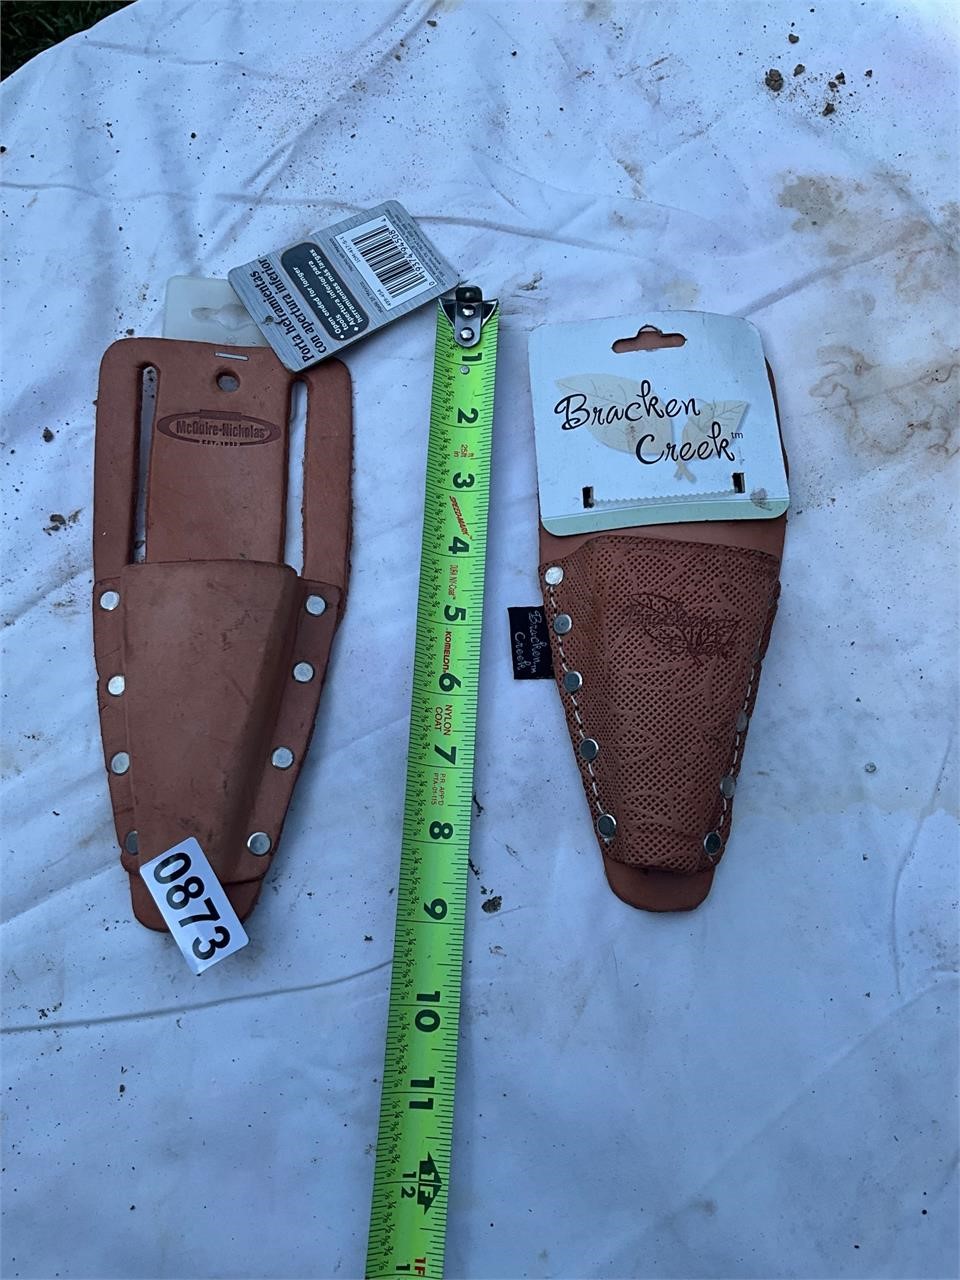 2- Leather tool pouches